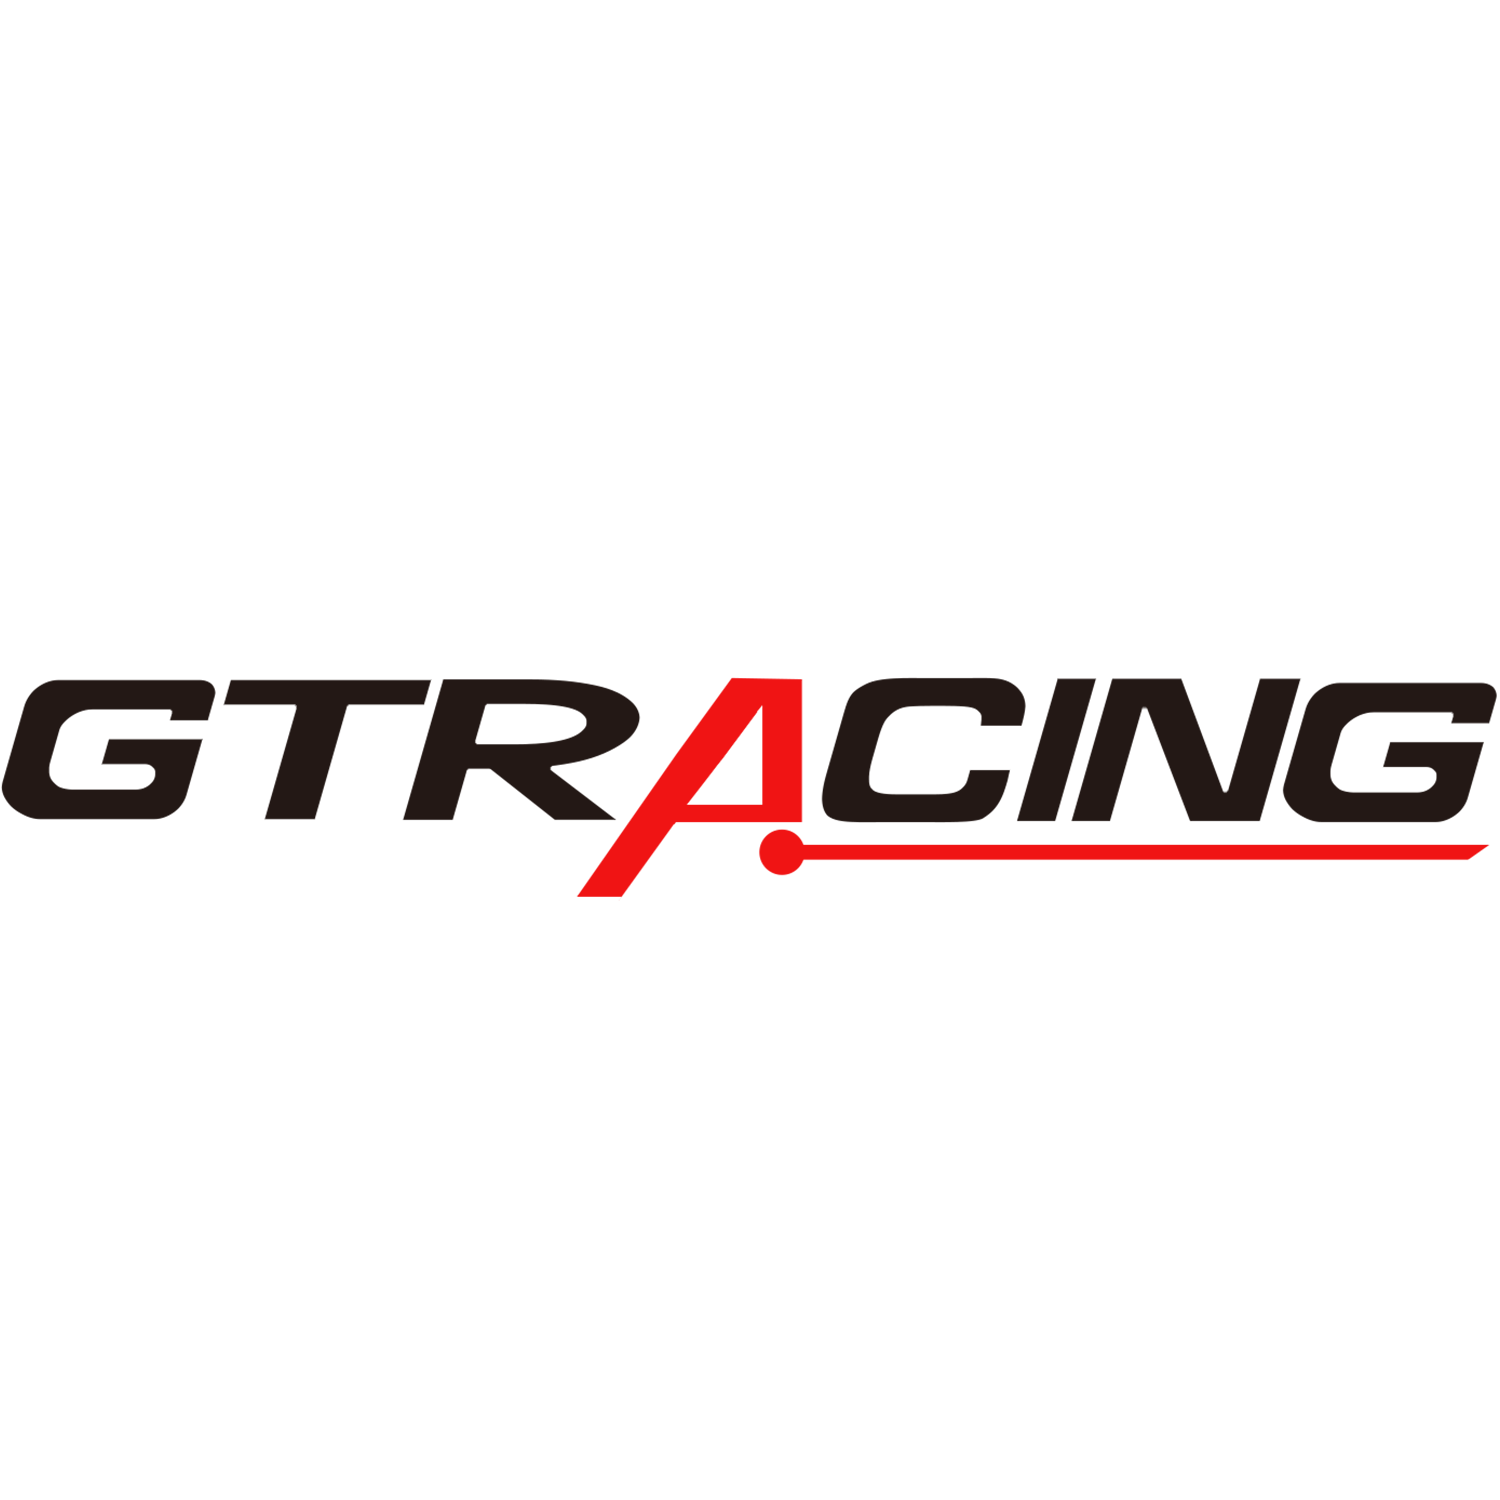 GTRACING Coupons & Promo Codes